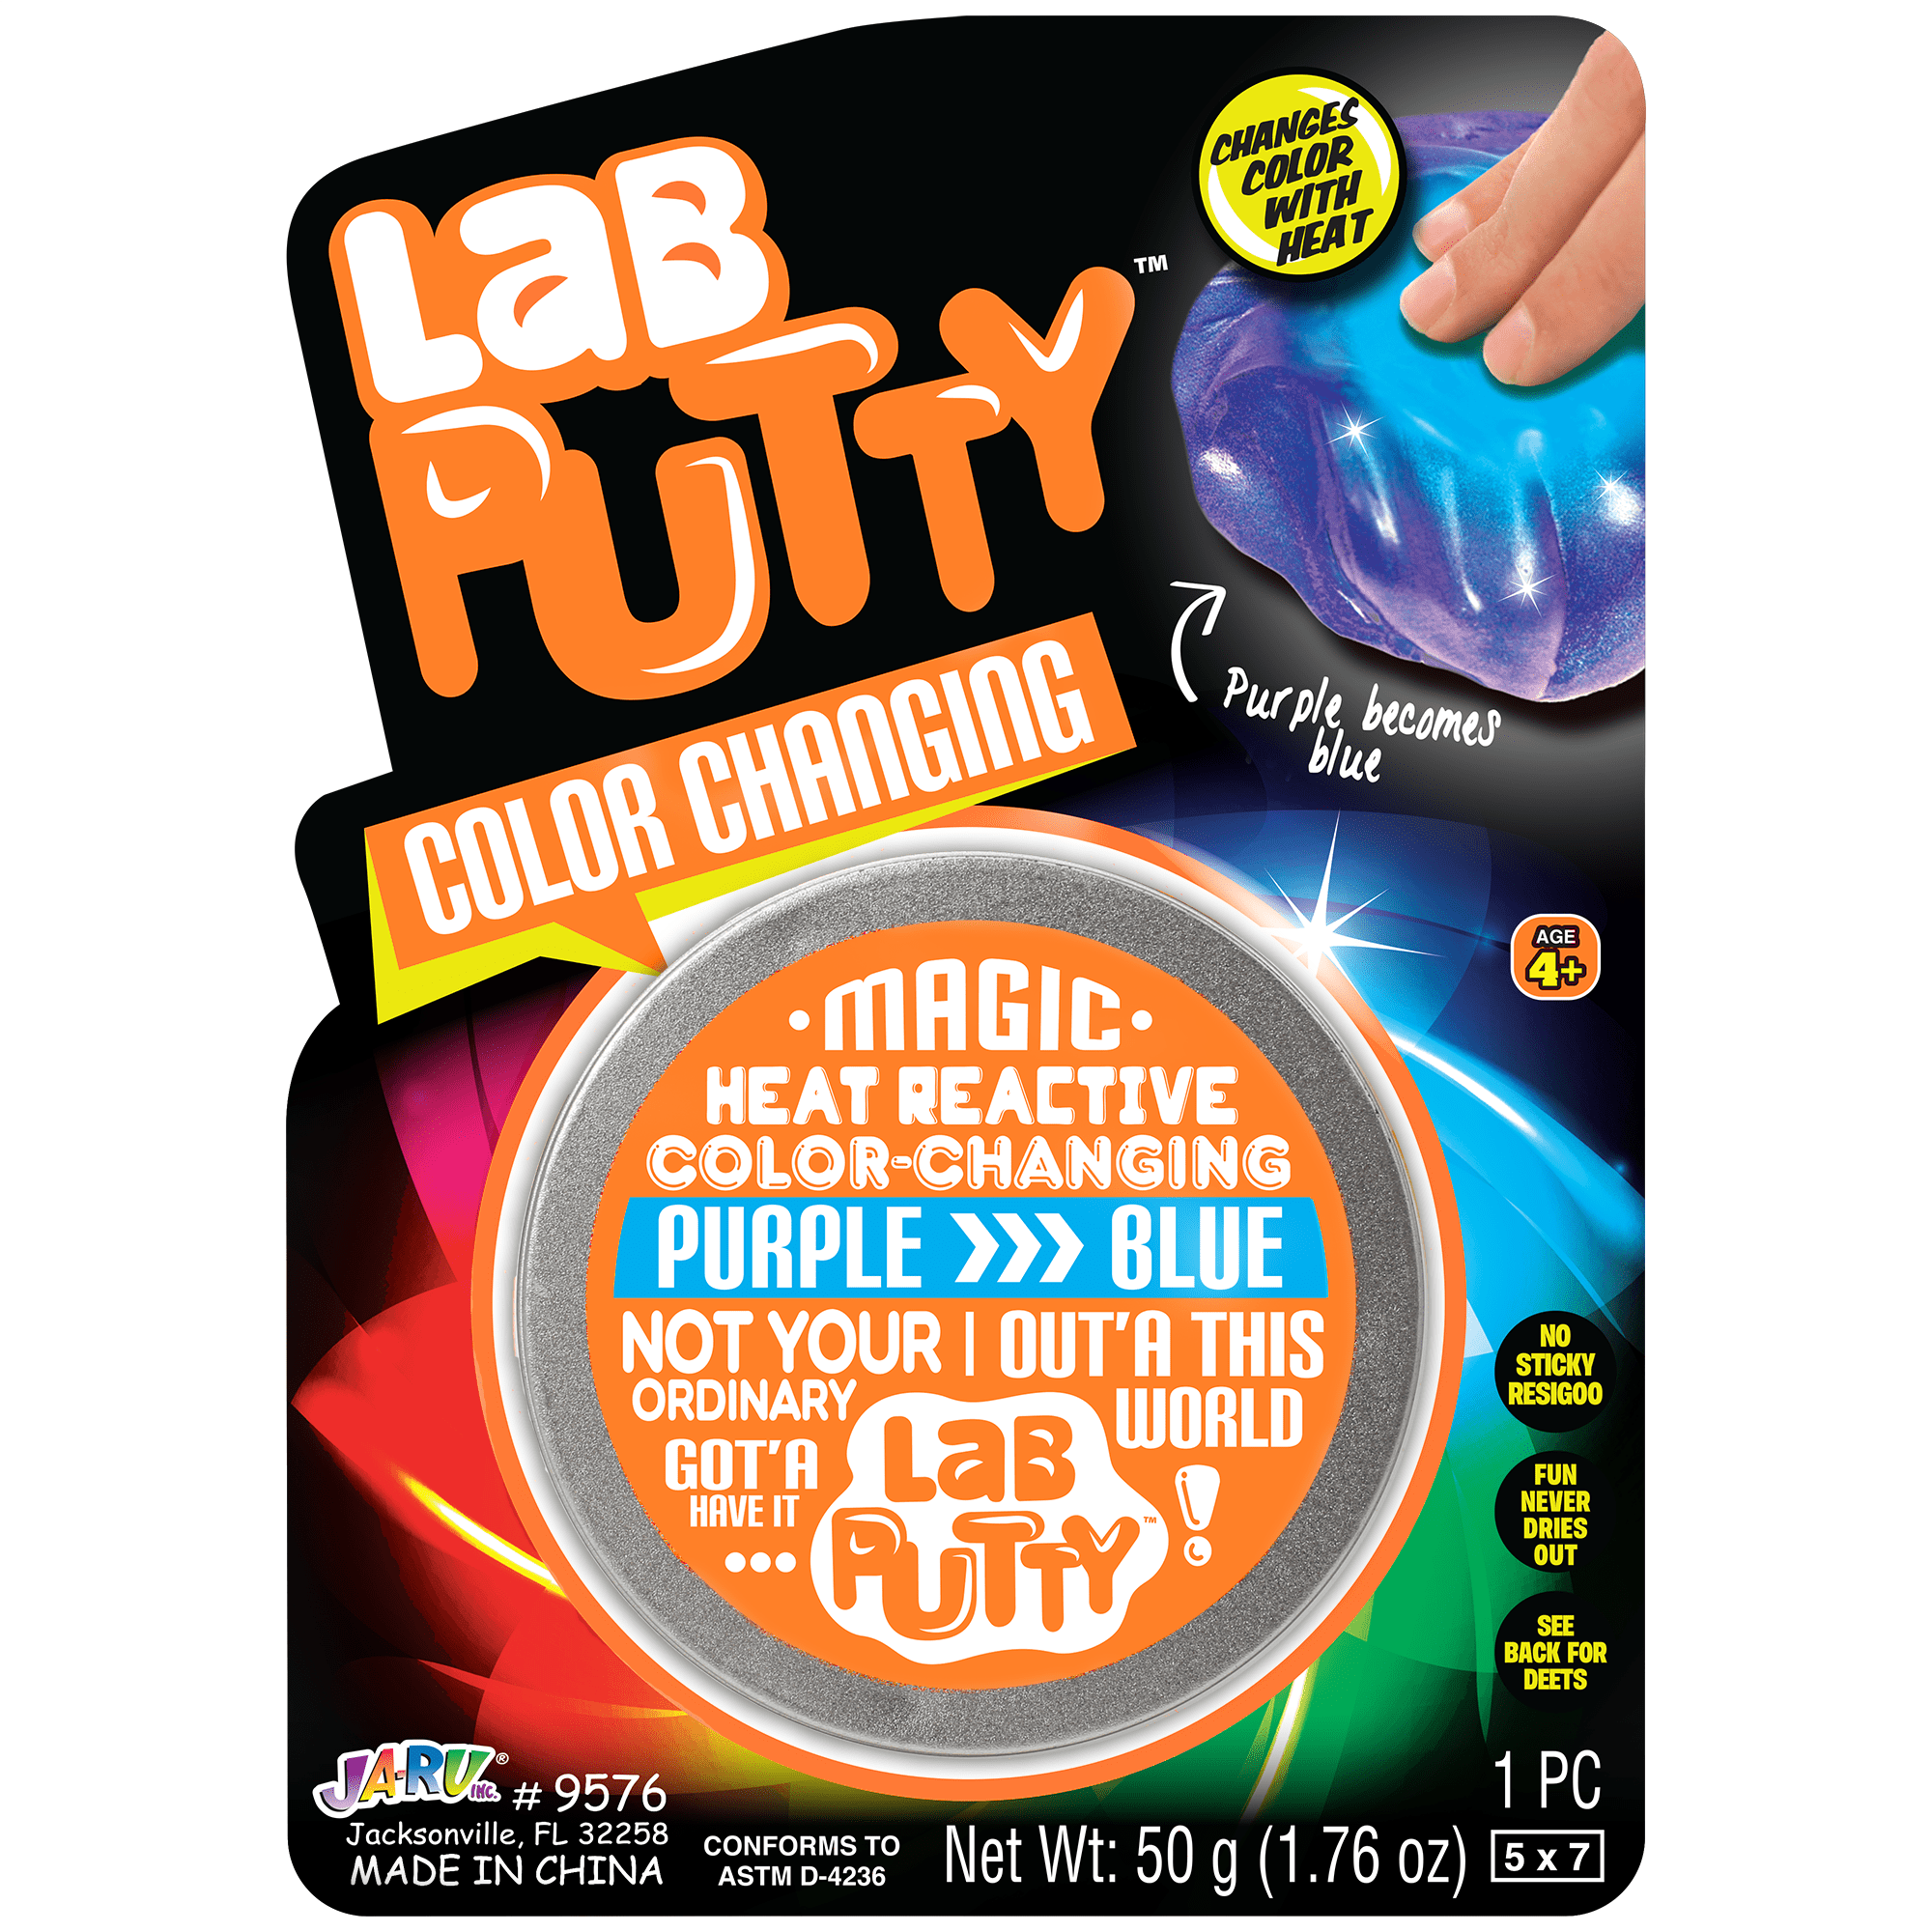 PLANET PUTTY Metallic Play Putty 9 Fun Colors PICK YOUR COLOR NEW! 